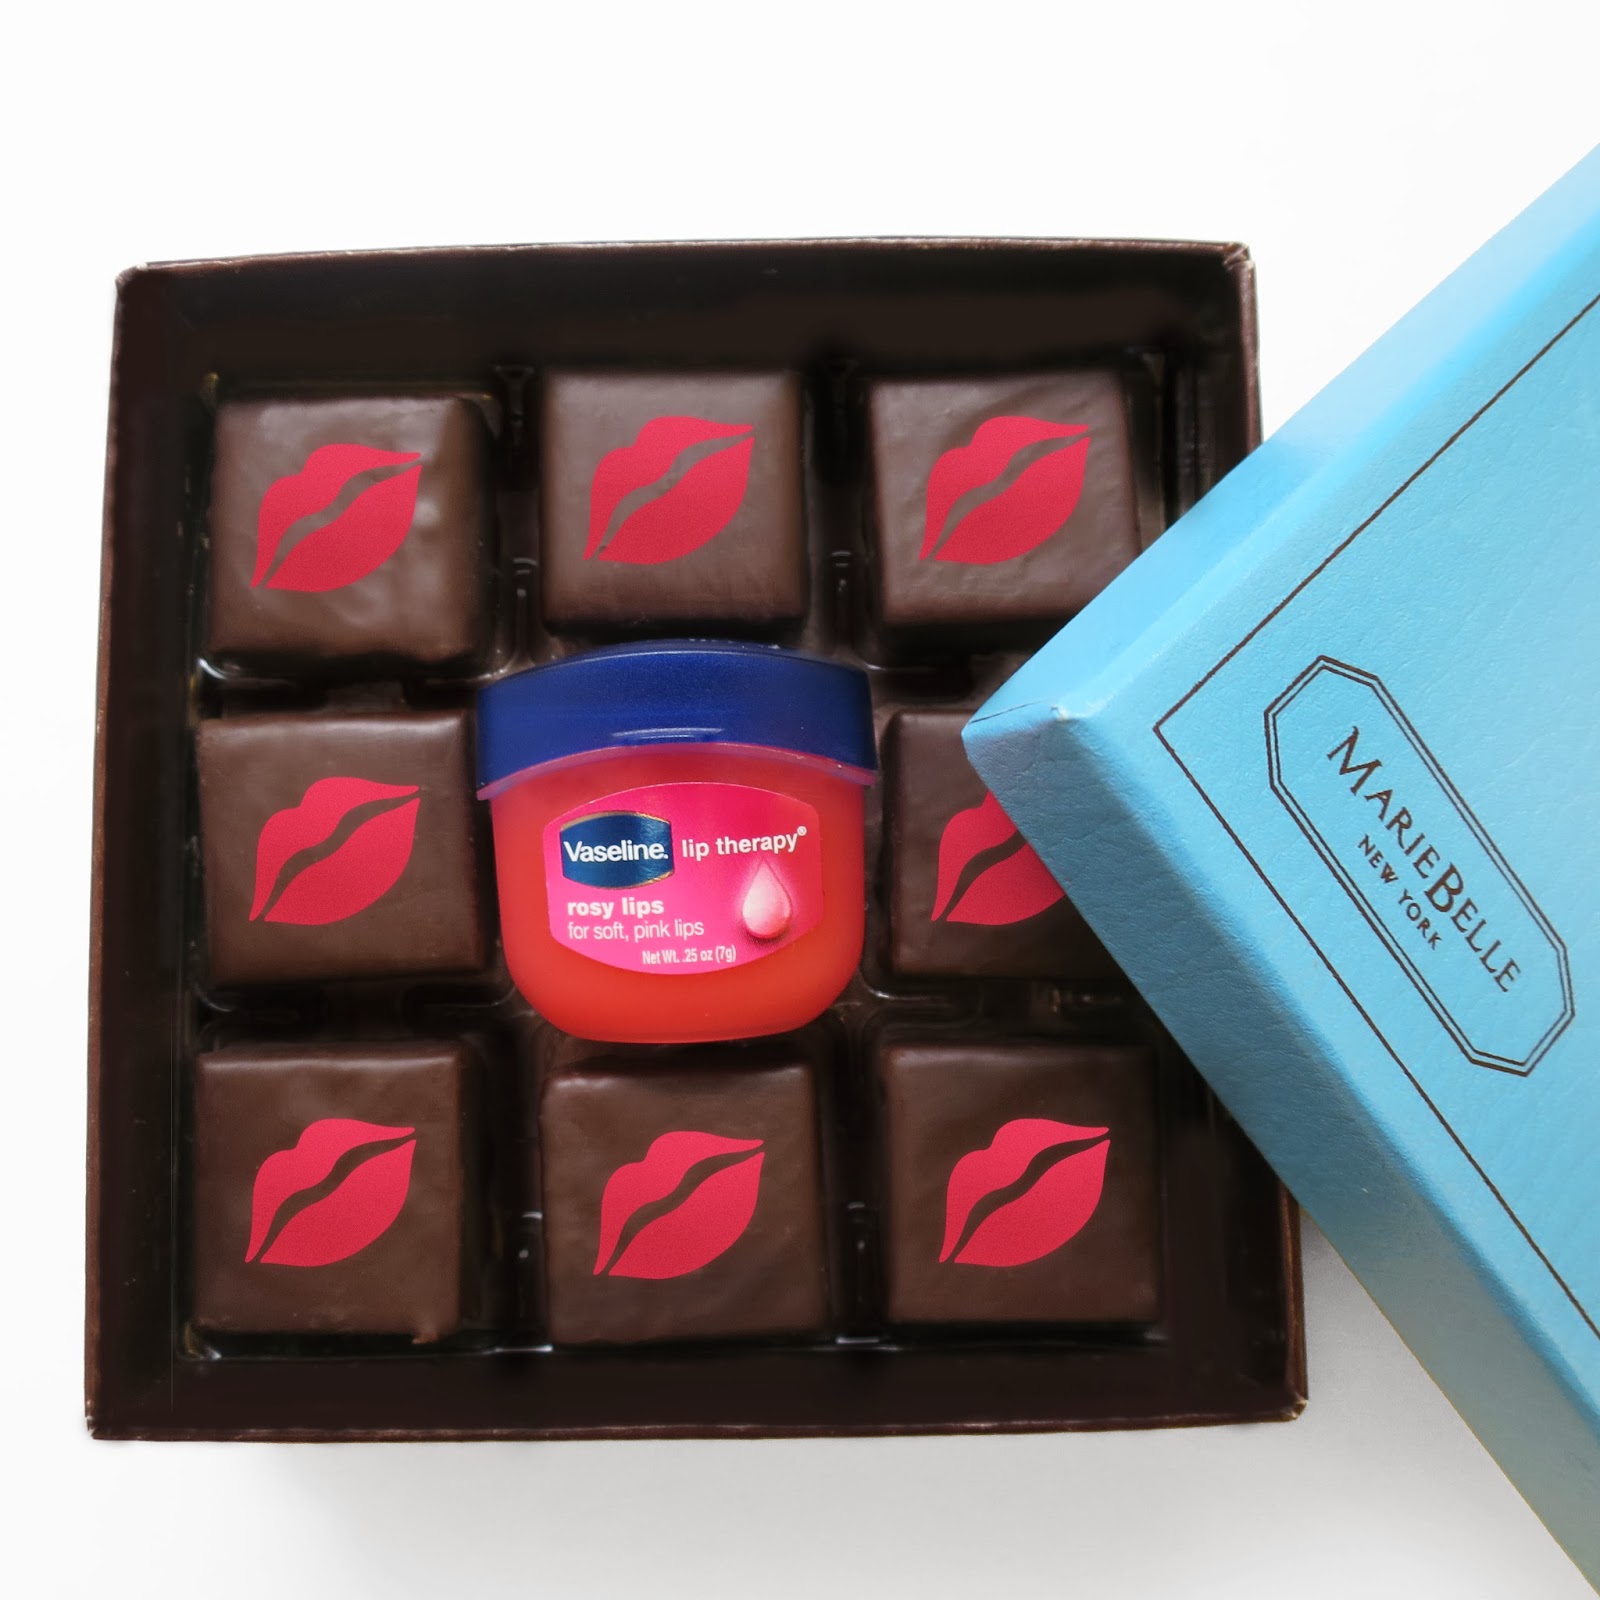 Share the Love with Vaseline Lip Therapy + MarieBelle Chocolates Giveaway